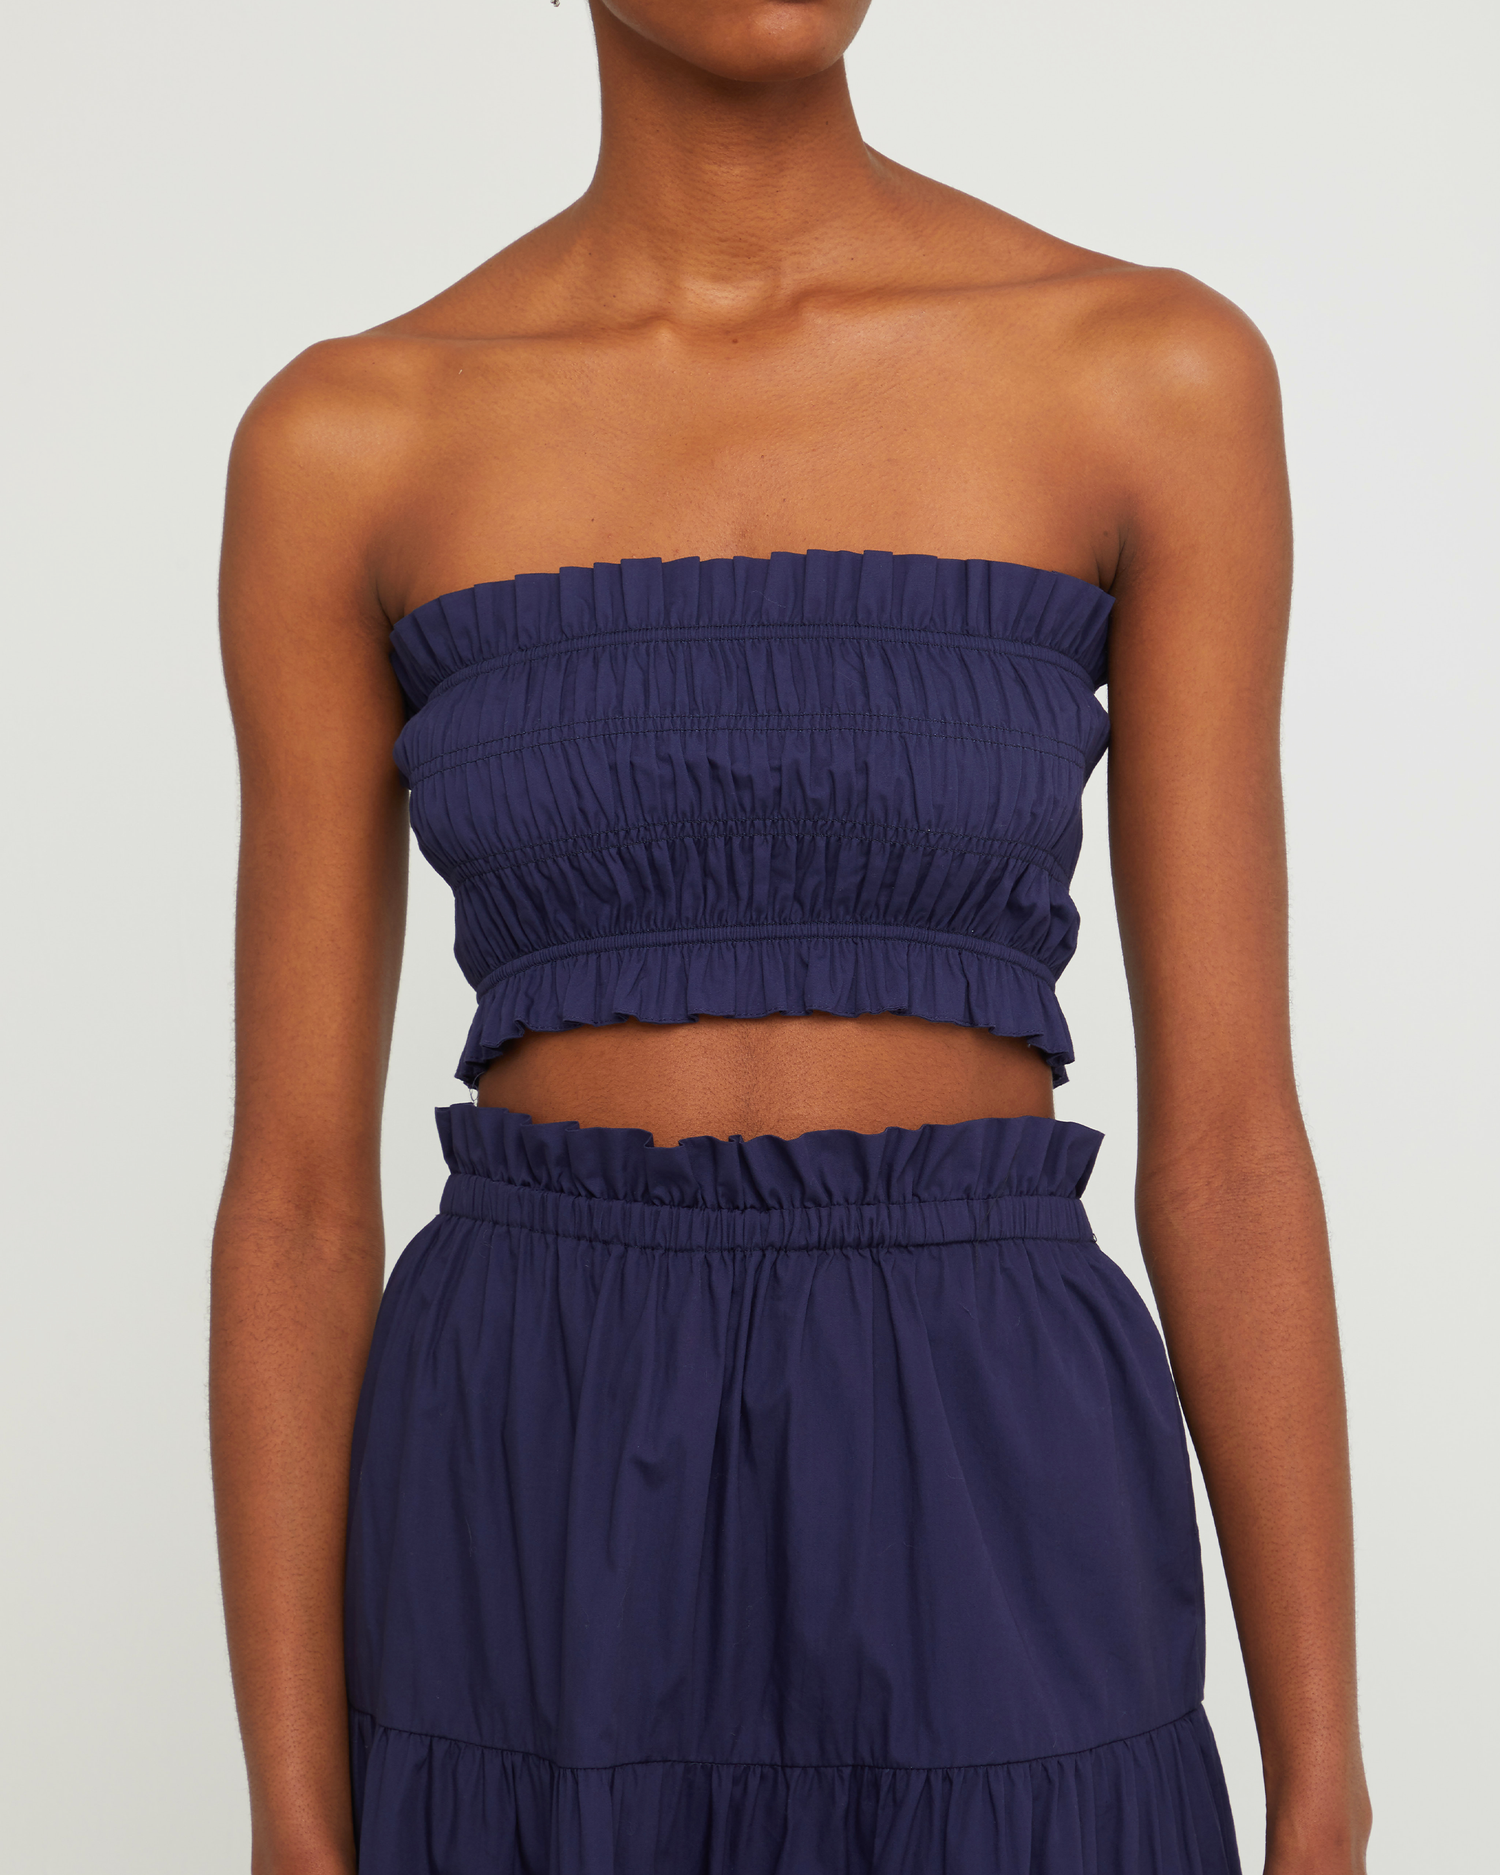 Sixth image of Ellery Set, a blue top and maxi skirt, strapless, ruched, ruffle, smocked, tiered